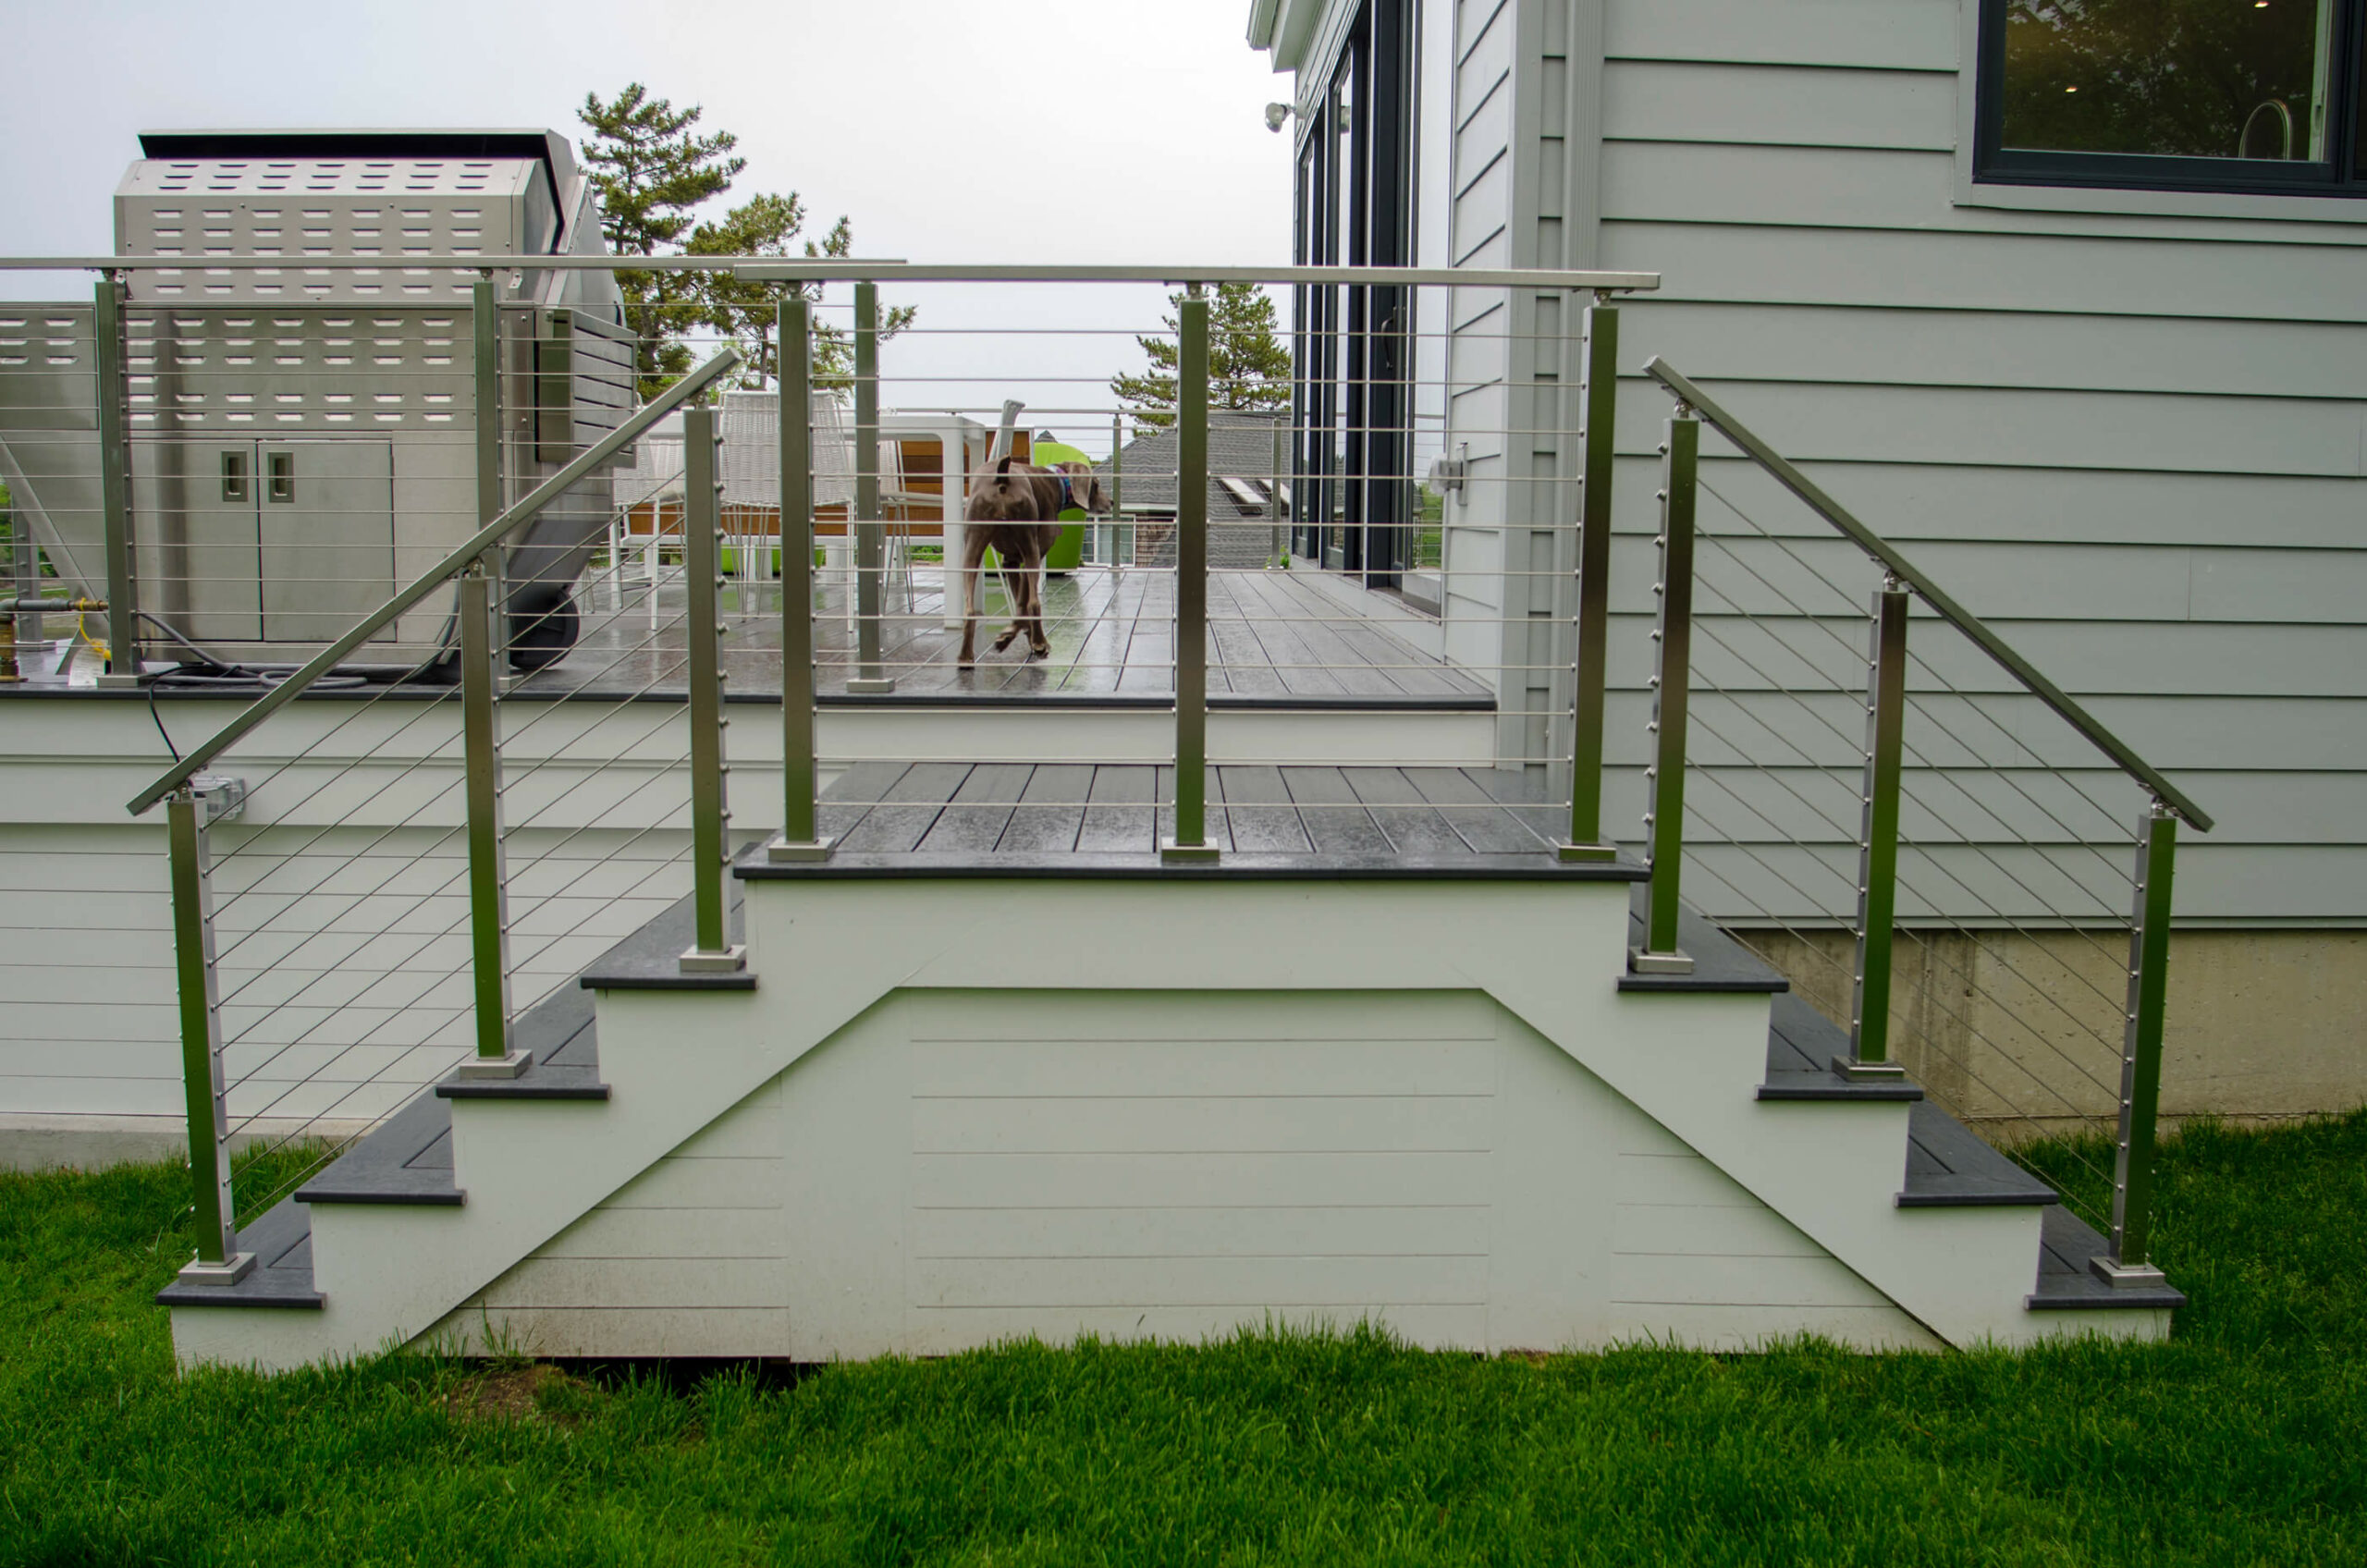 Photo of a cable rail stair